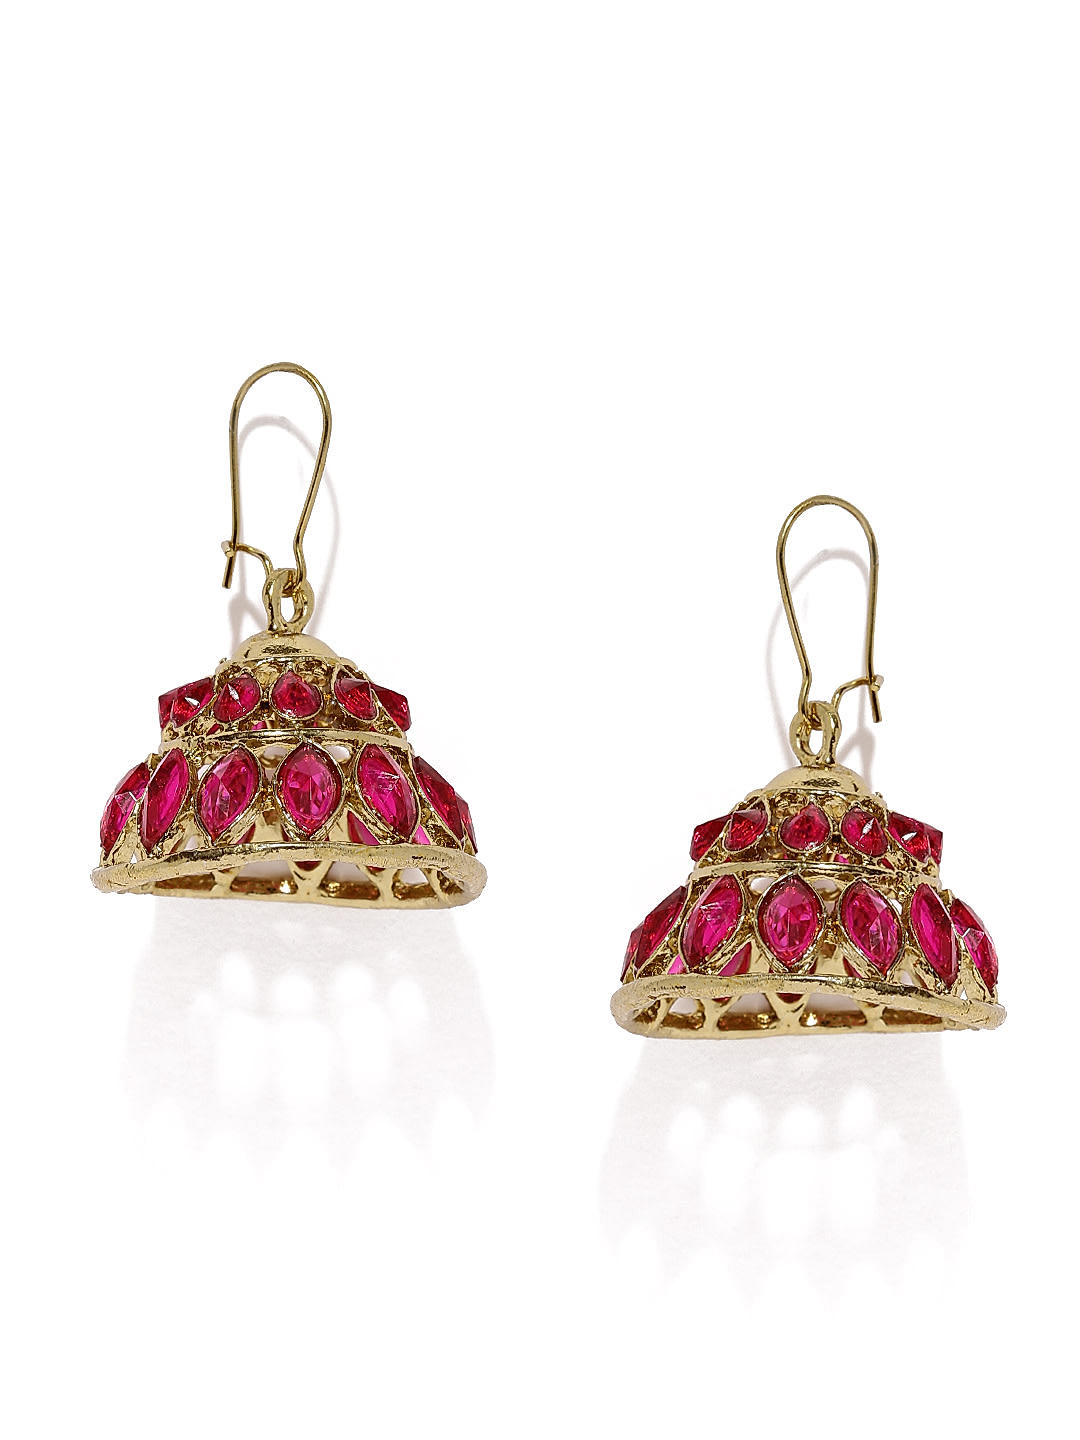 Top more than 175 gold earrings in lalitha jewellery latest